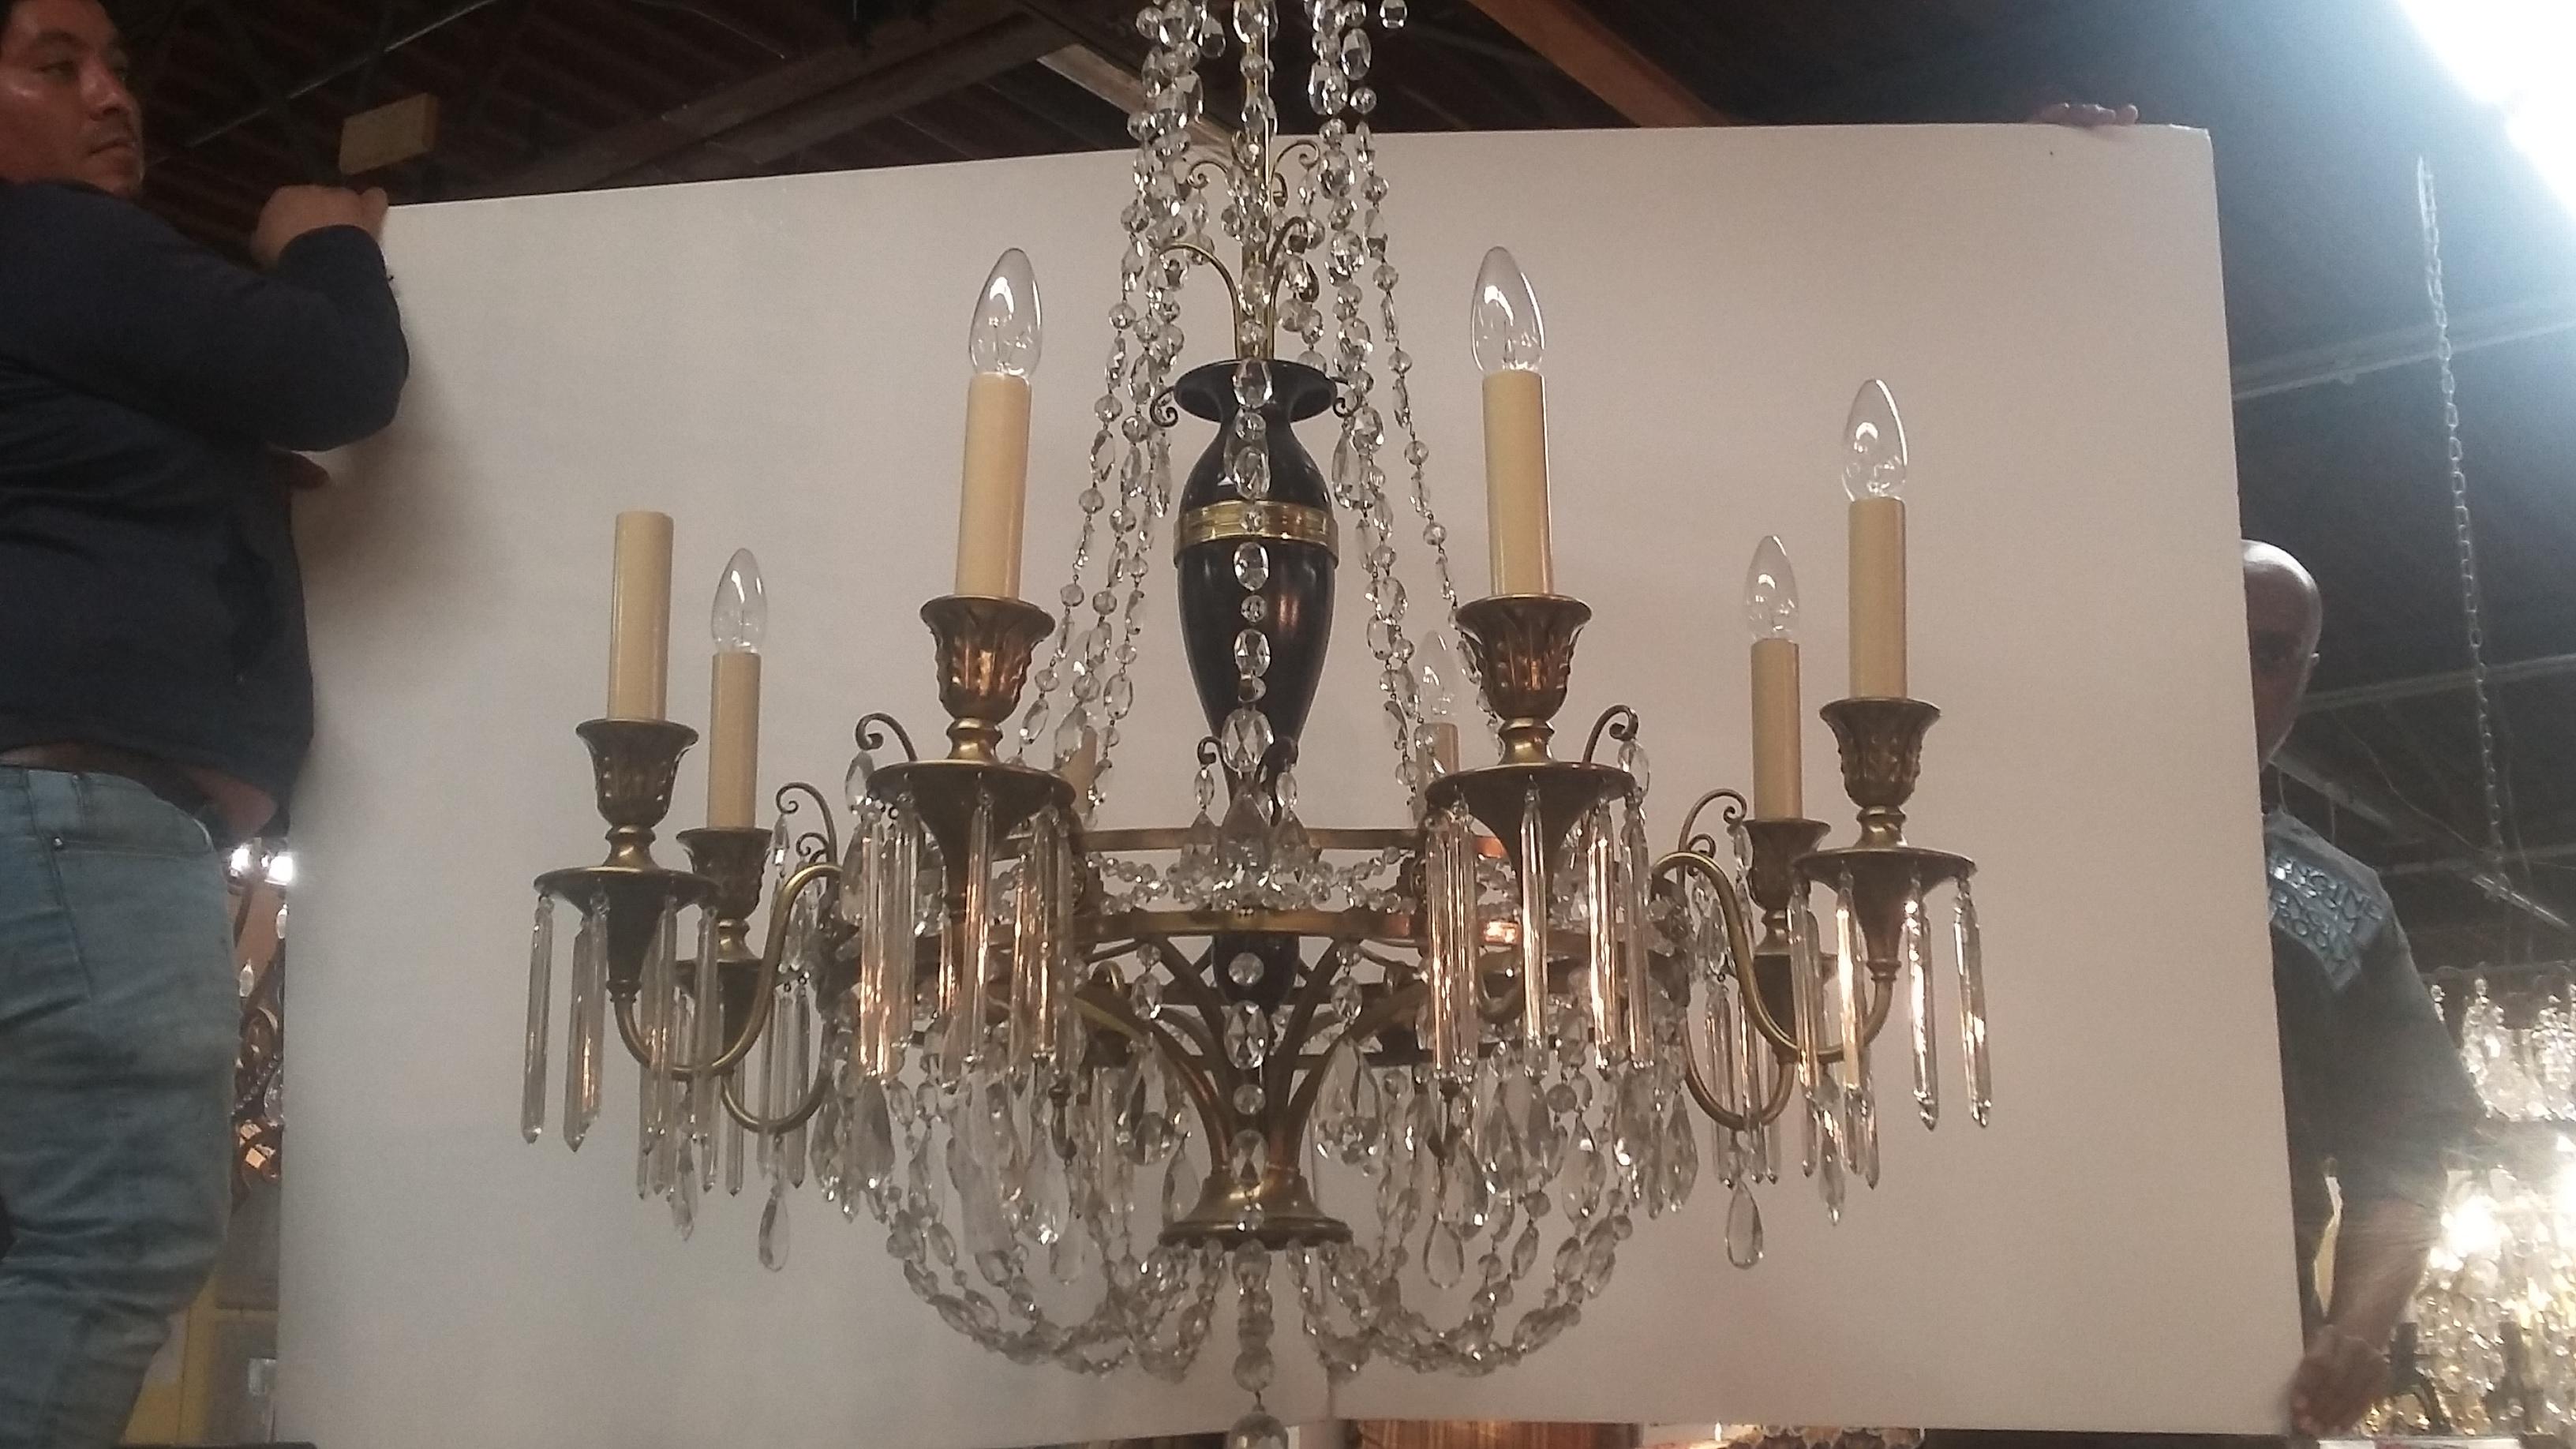 This 8 light brass and crystal chandelier has been cleaned and rewired. Satin finish on the brass is very nice. Various sized crystals throughout the chandelier. Estimated as early 20th century. Originally salvaged from a Greenwich, CT estate.